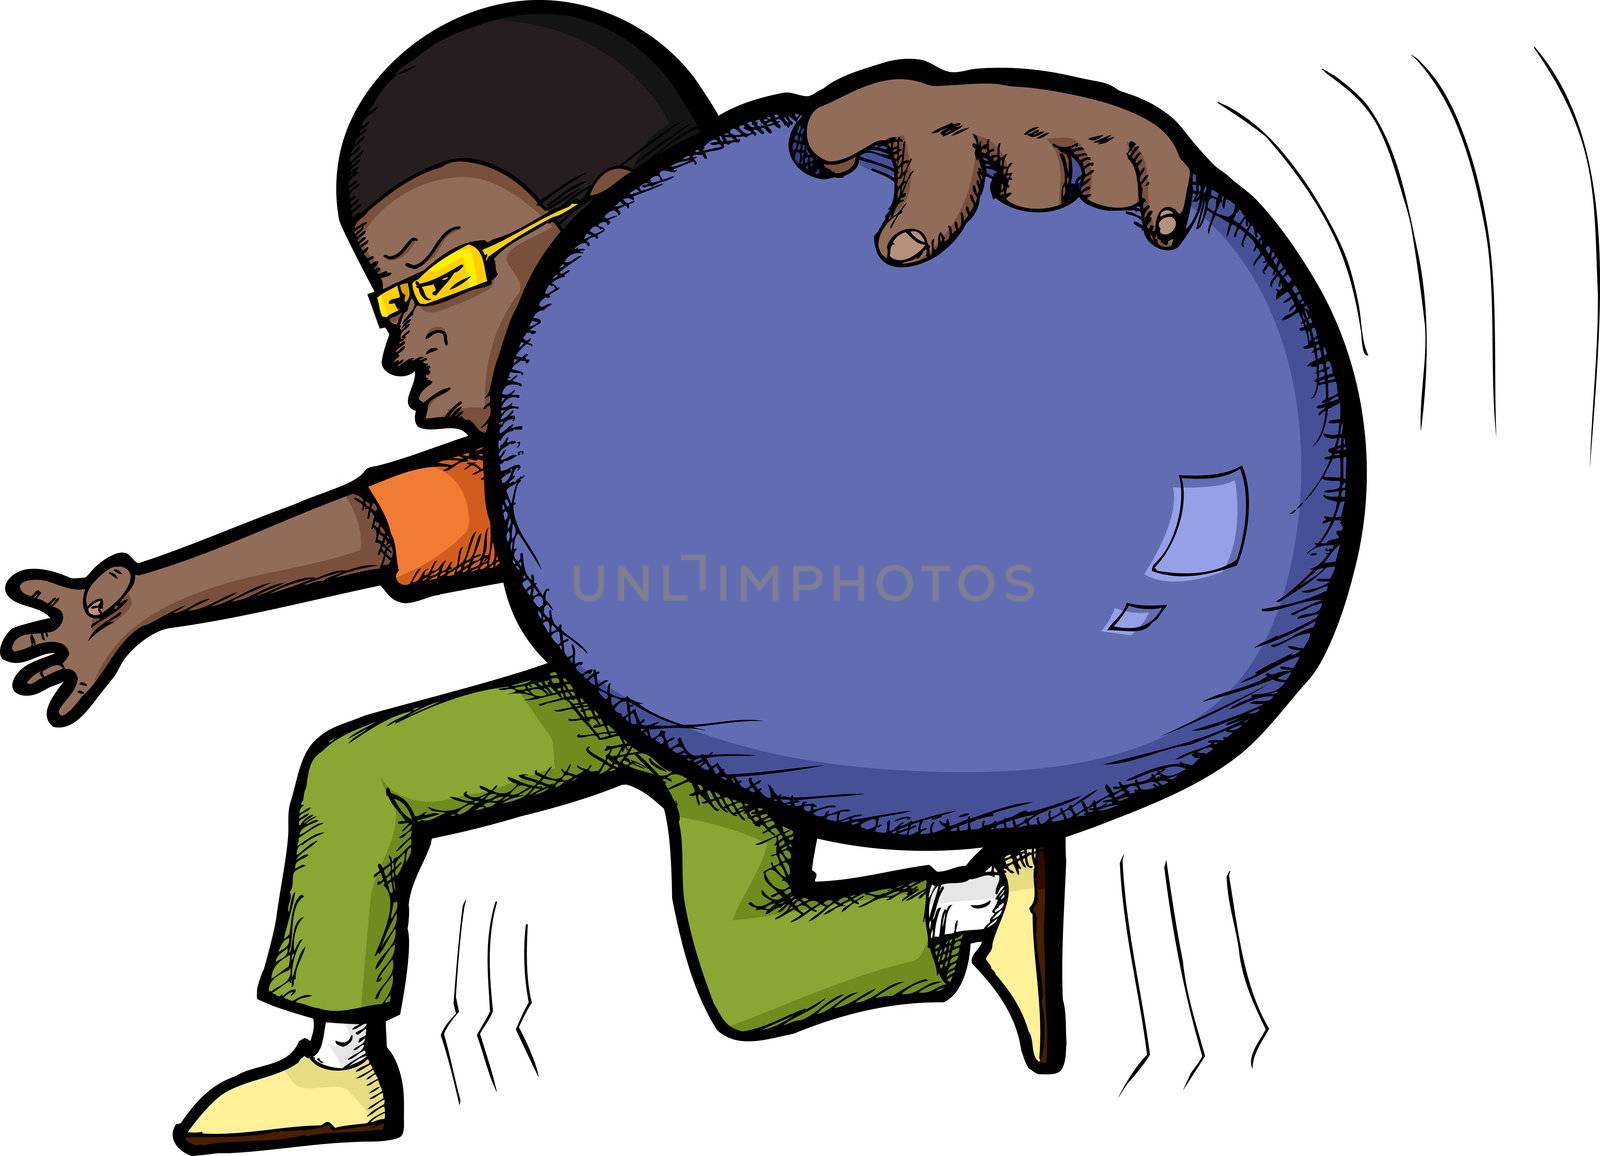 Young bowler tosses his ball over white background